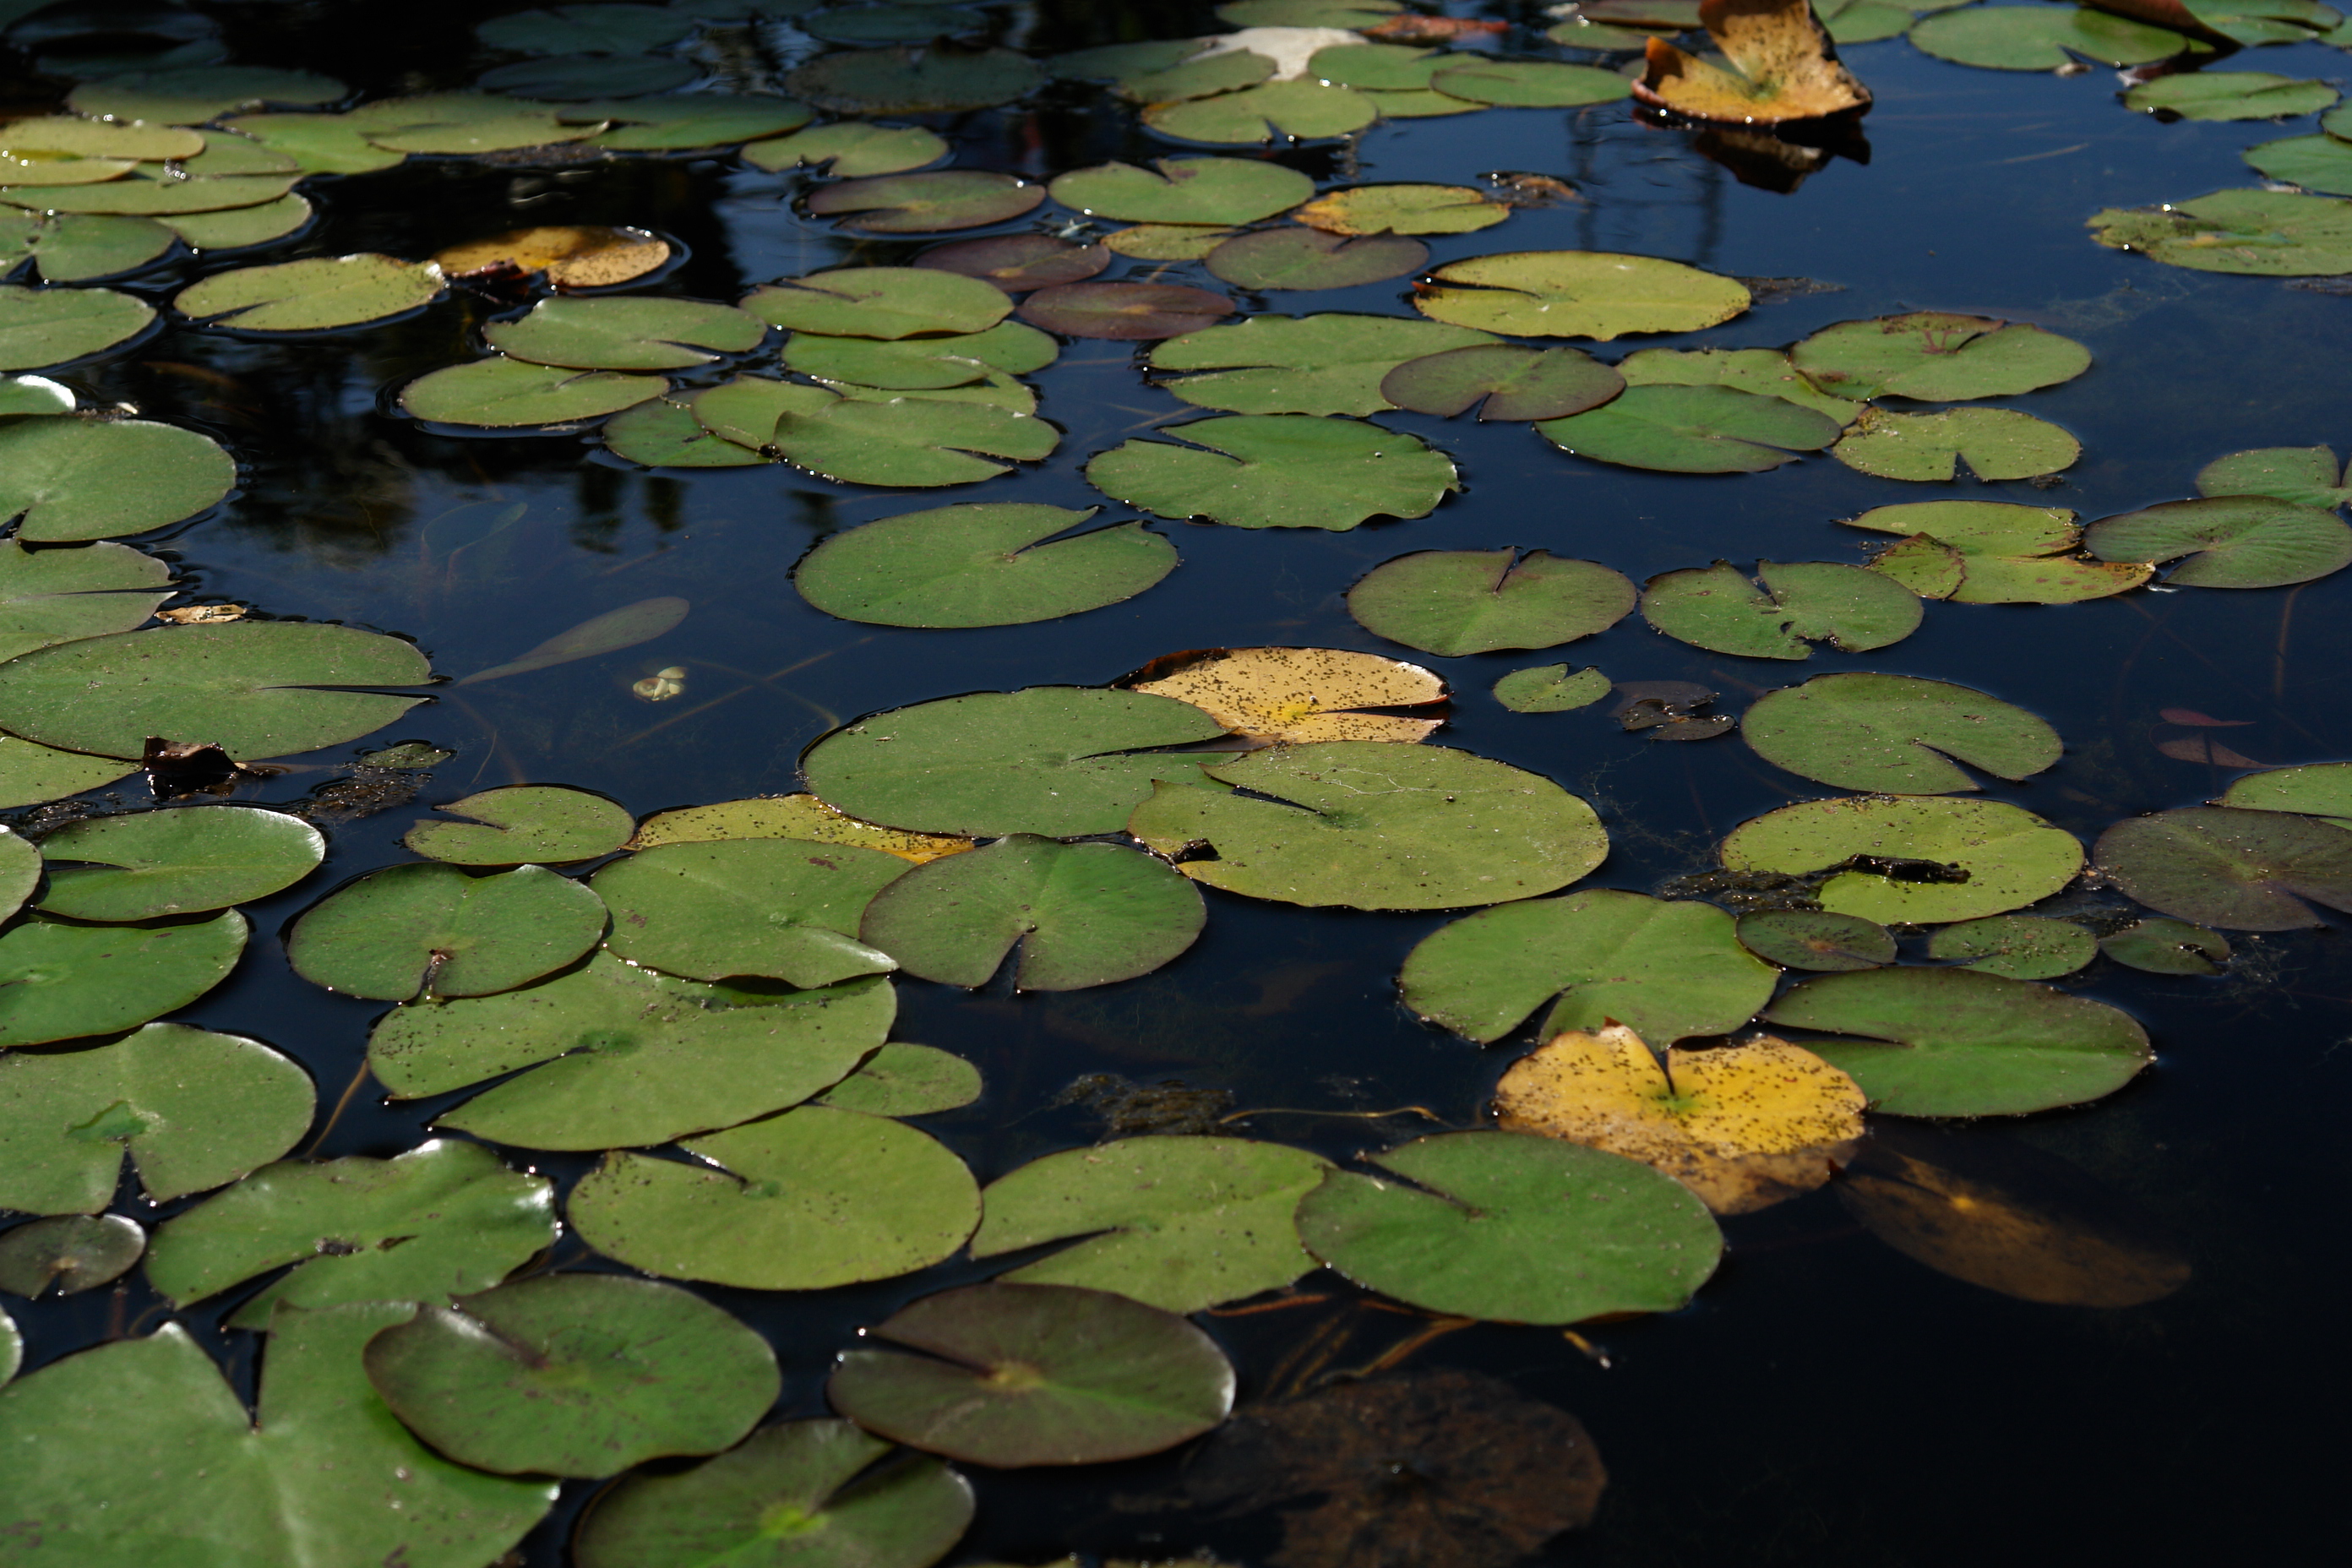 File:Pond of Water Lilies (3400959101).jpg - Wikimedia Commons